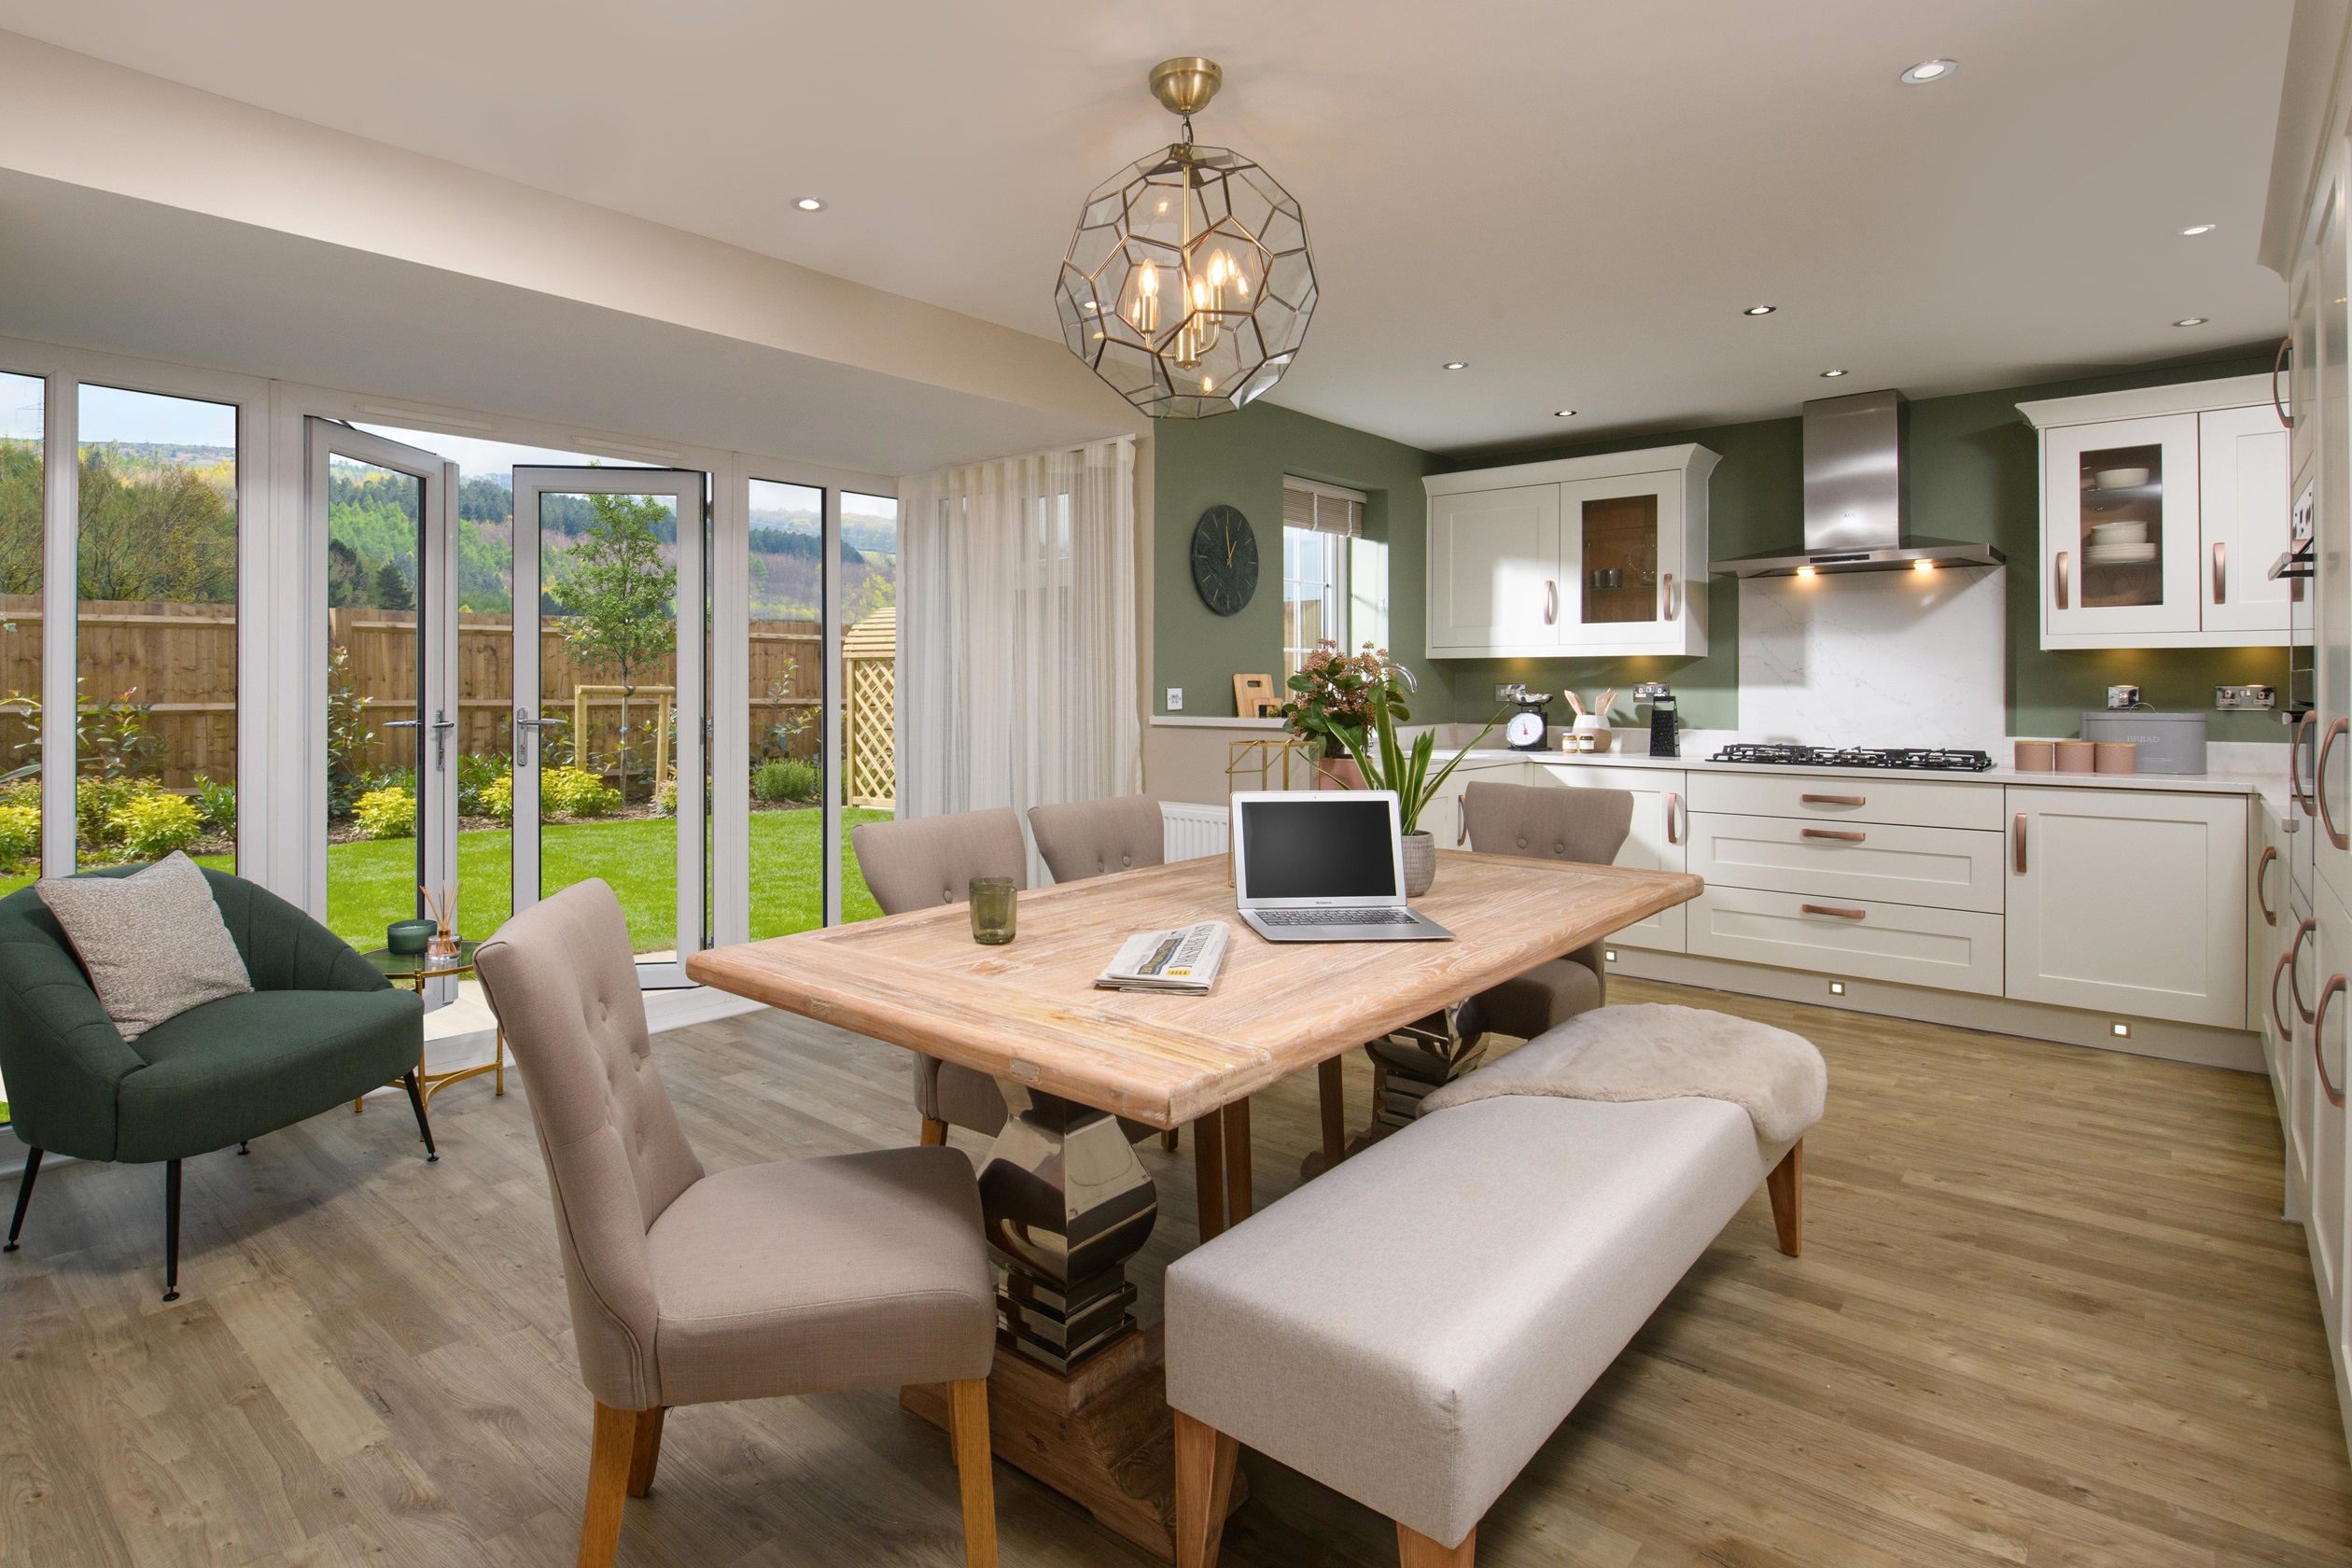 Property 3 of 10. Internal Kitchen Image Of The Holden Oughtibridge Valley